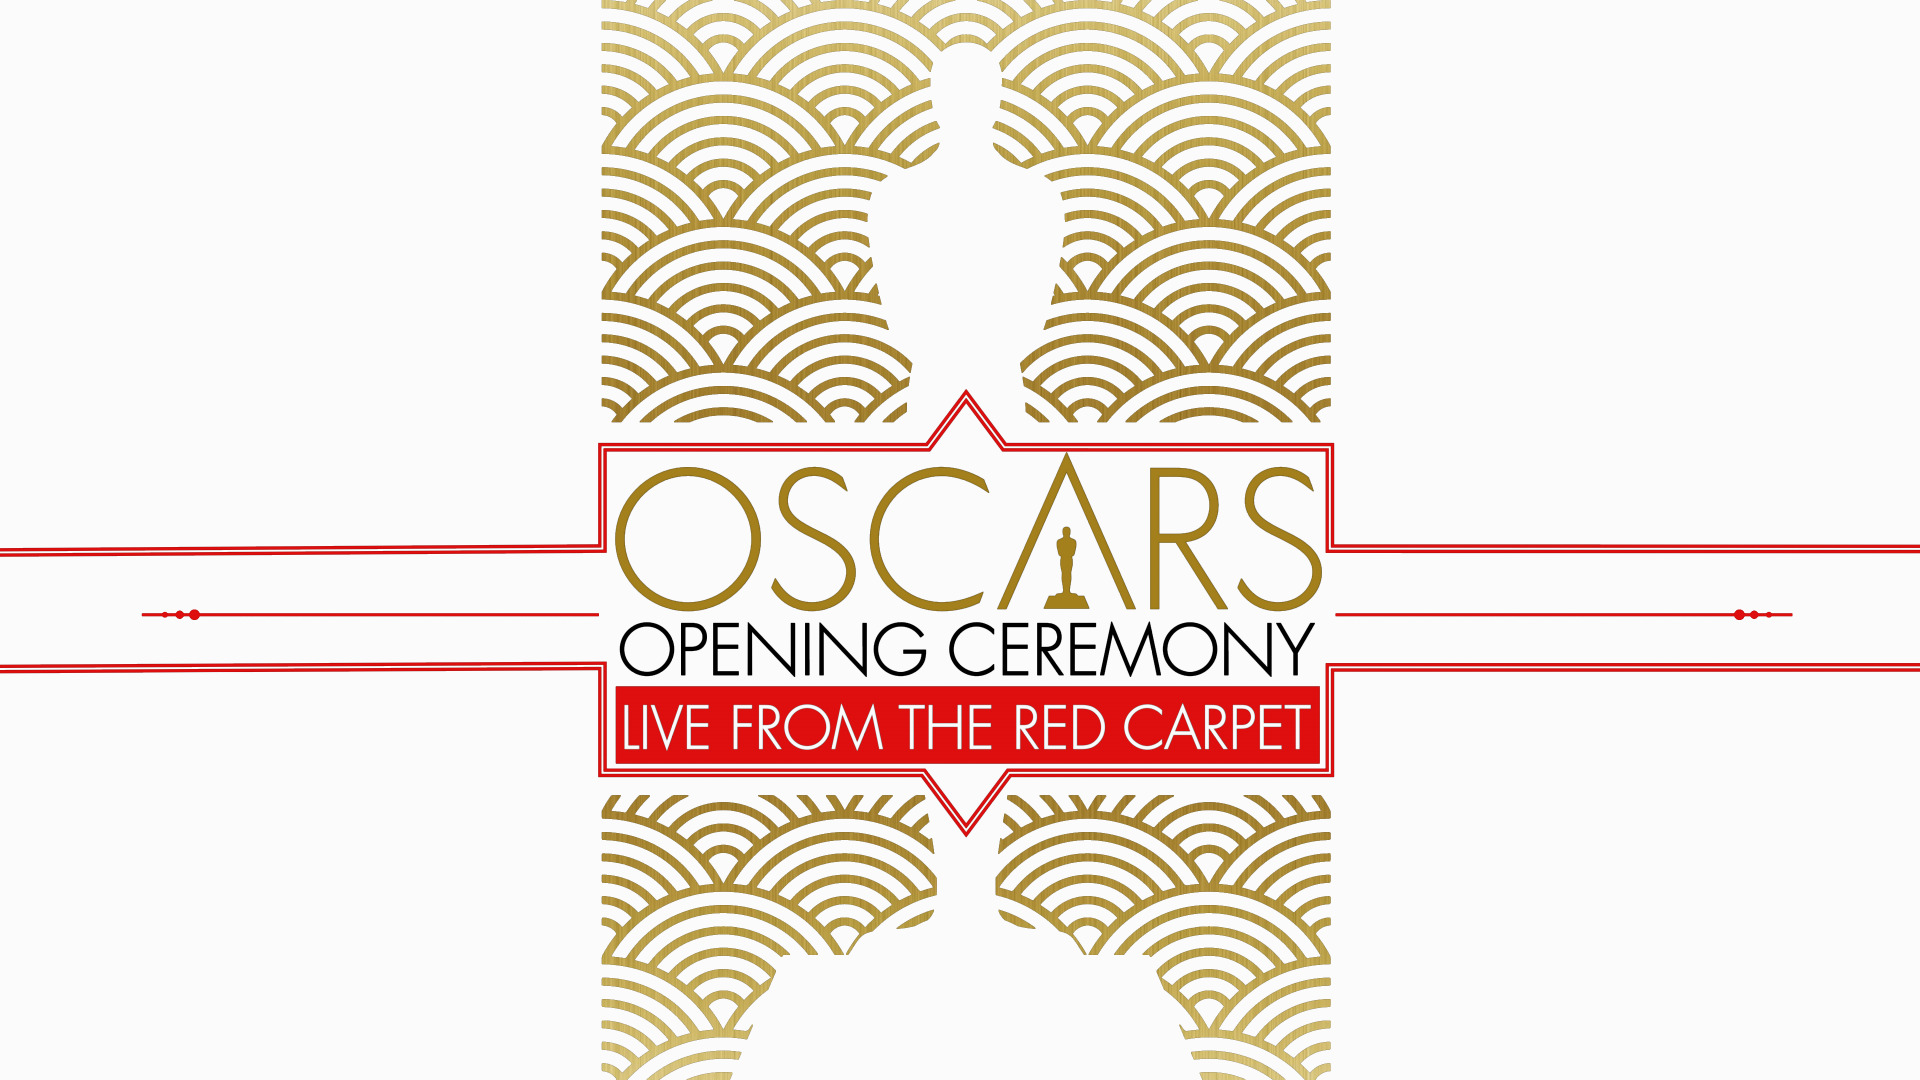 Show Oscars Opening Ceremony: Live from the Red Carpet